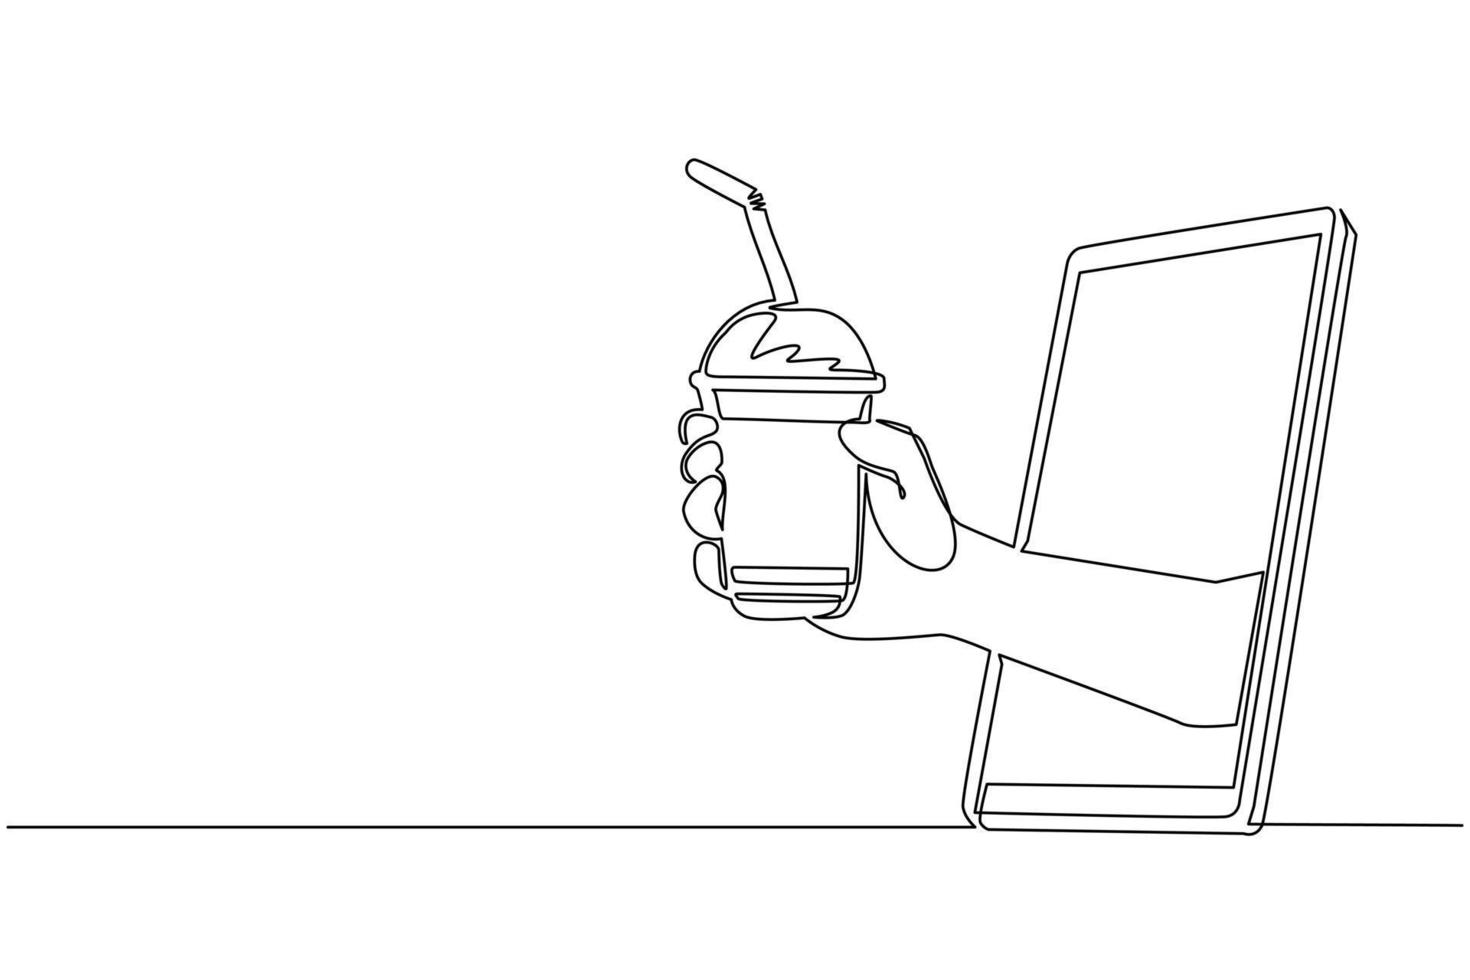 Single one line drawing hand holding bubble tea cup with straw through mobile phone. Concept of cafe drink order delivery online food. Application for smartphones. Continuous line draw design vector